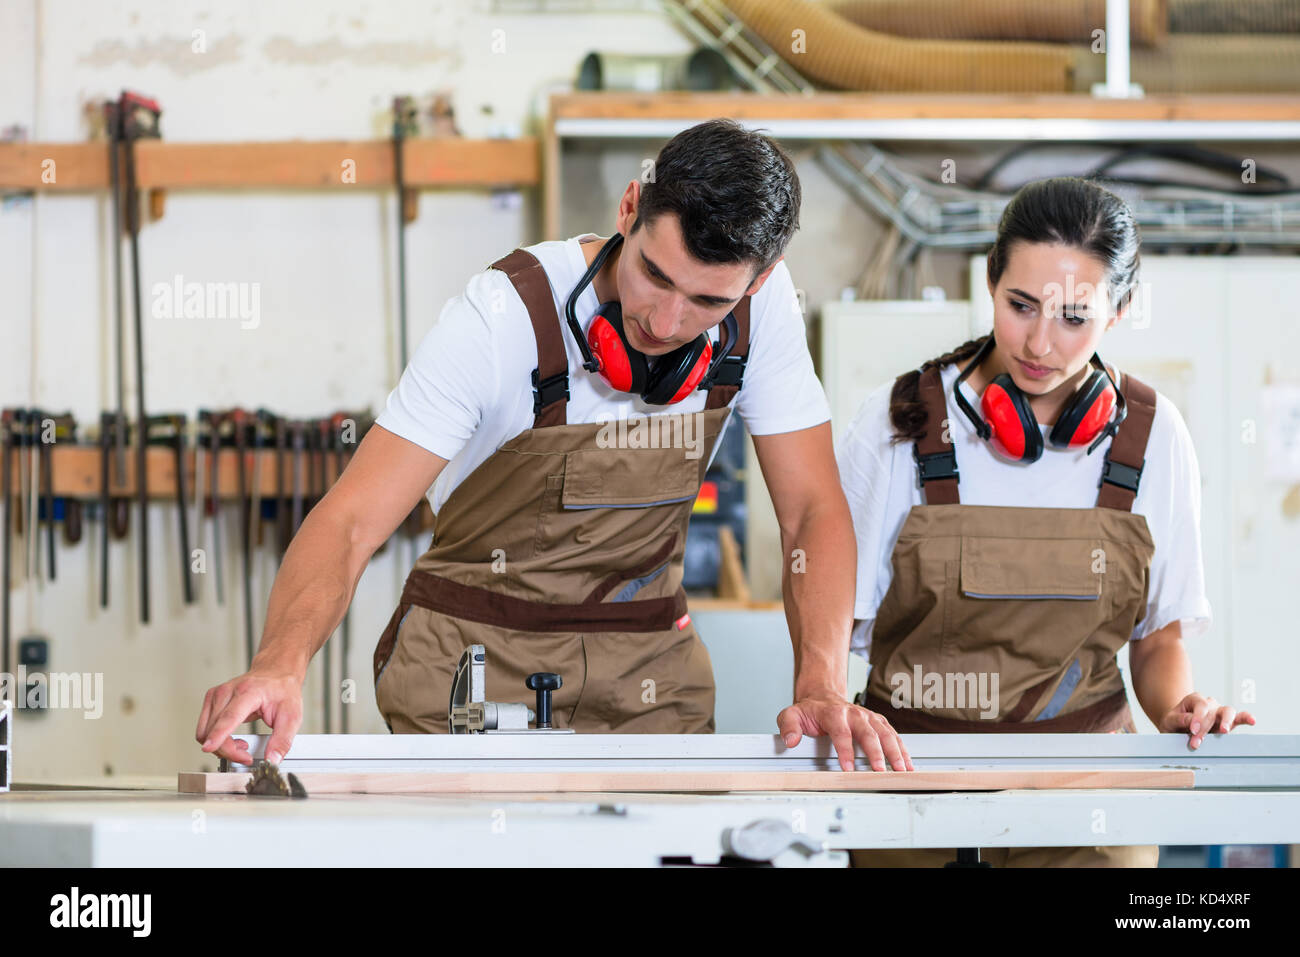 Carpenter and apprentice working together in workshop Stock Photo